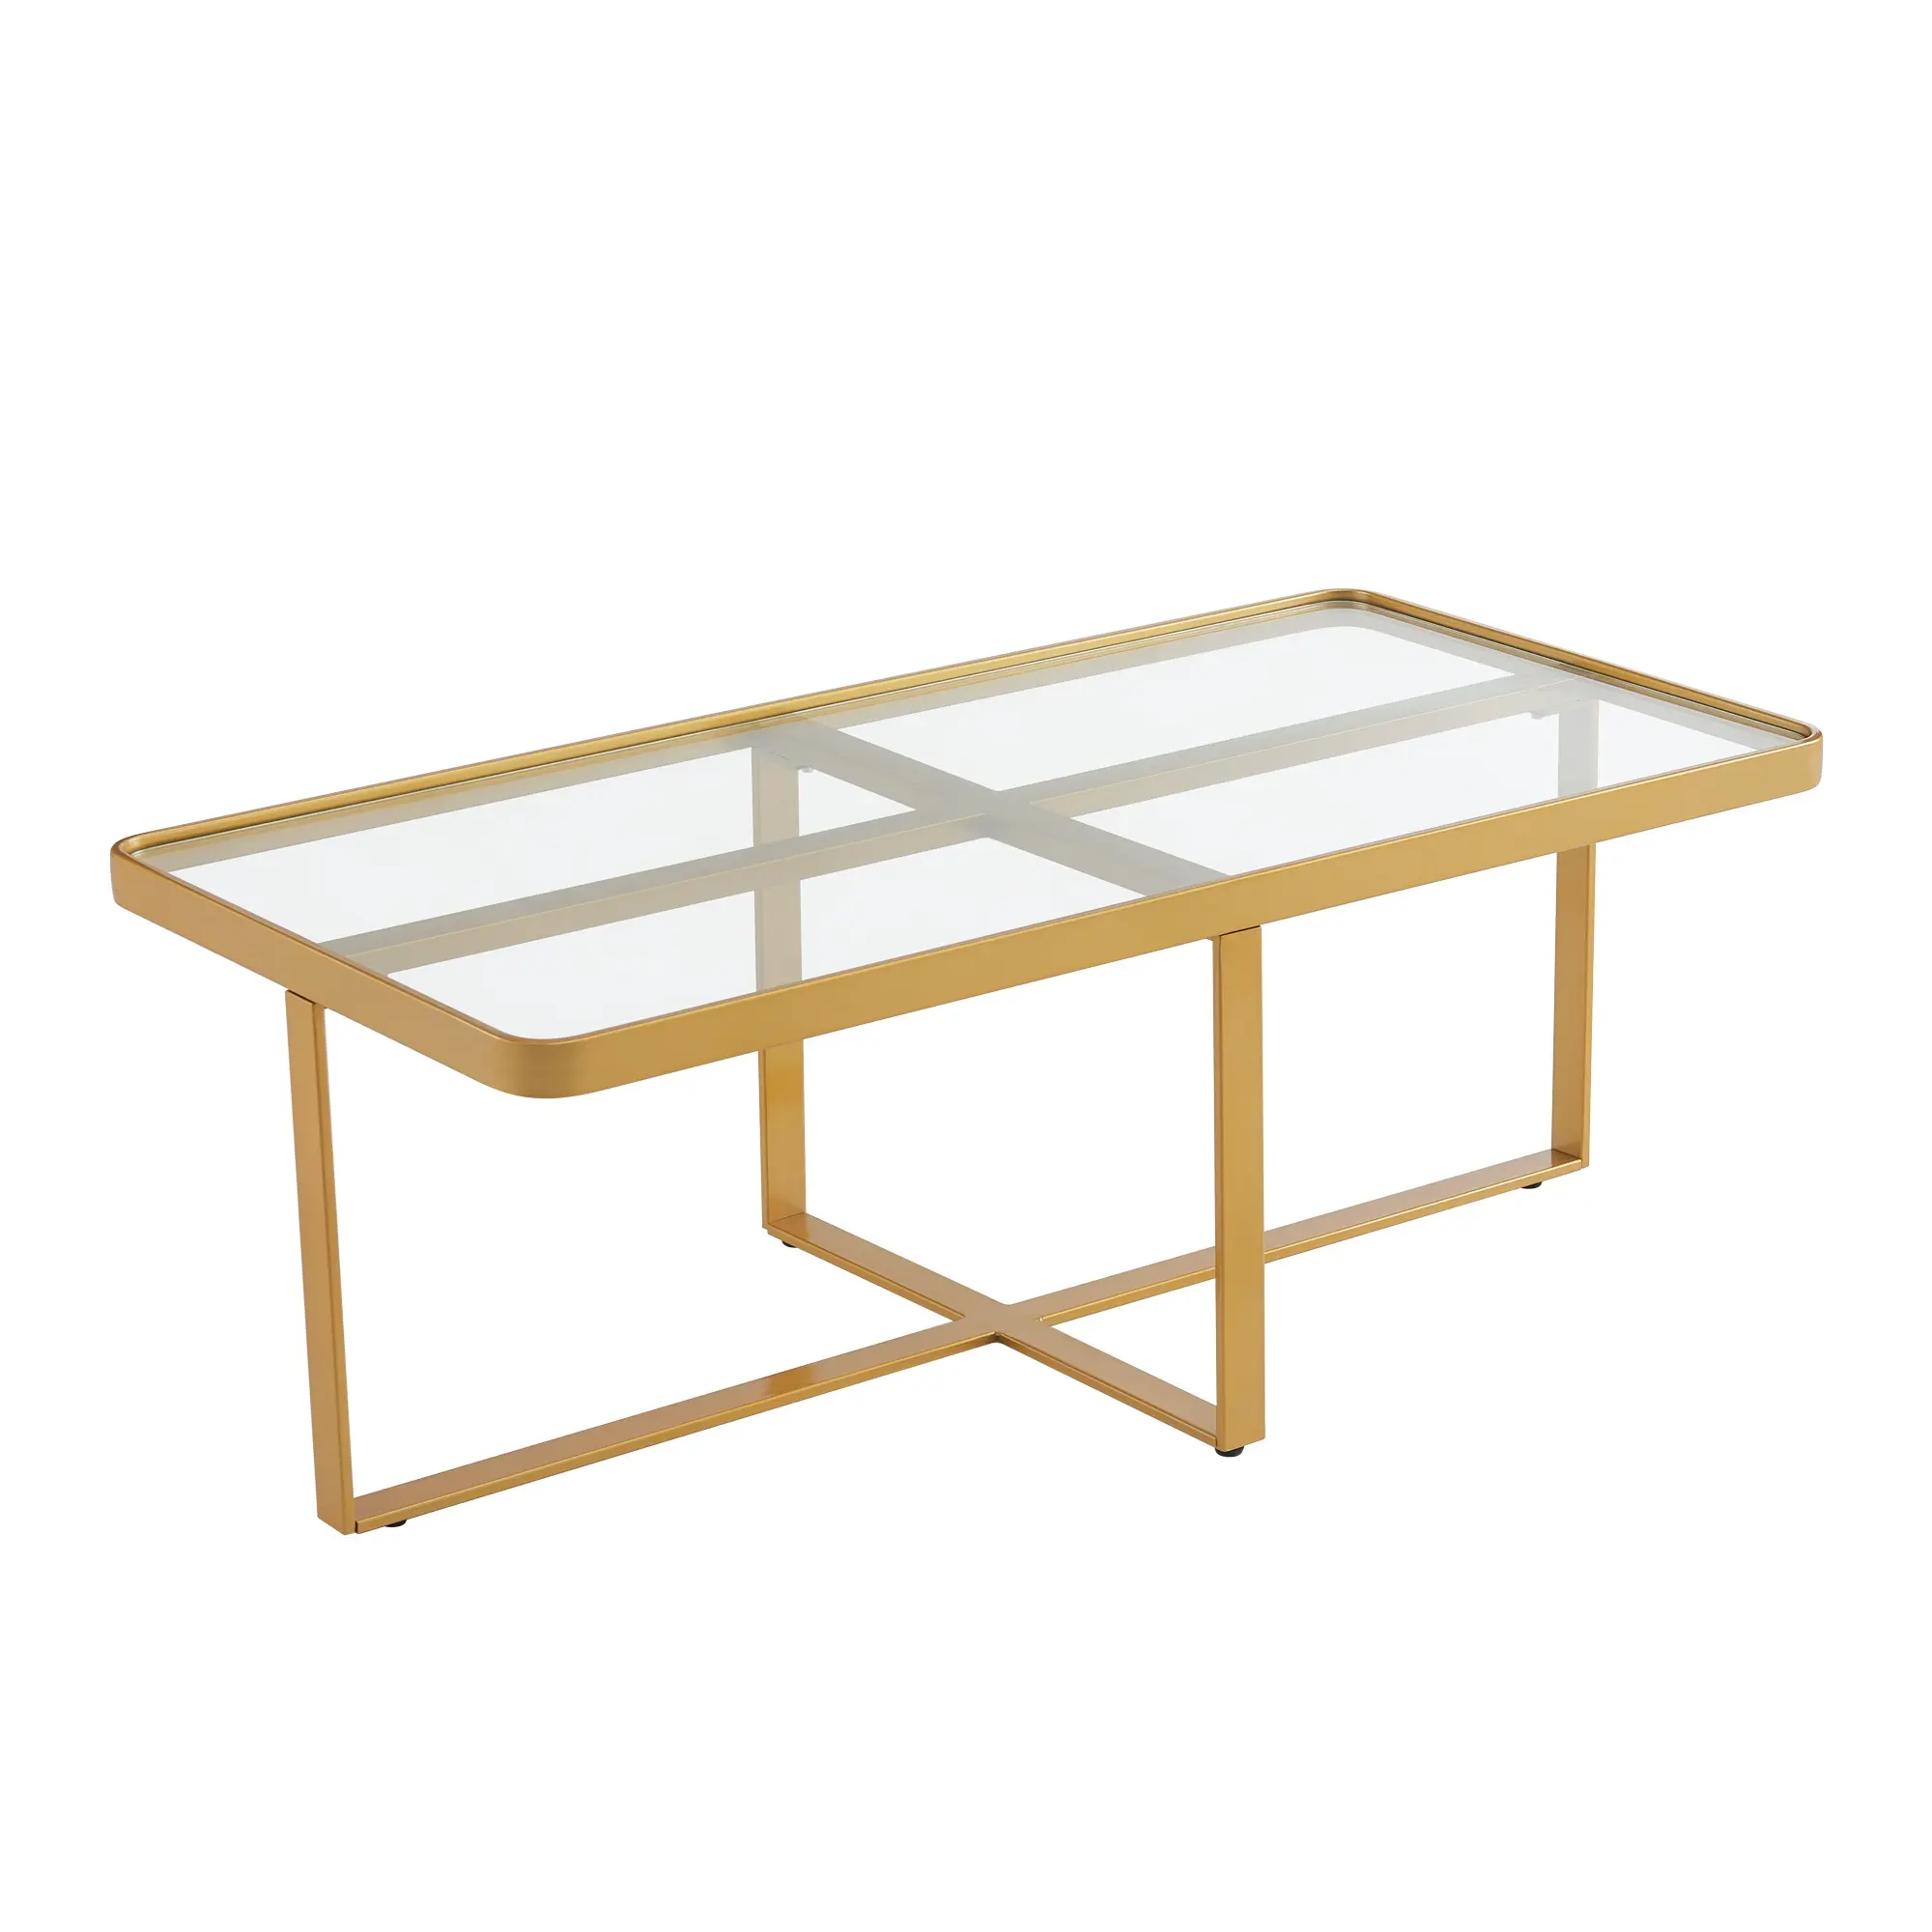 Light Luxury glass top cafe table Modern living room furniture glass table living room furniture coffee table